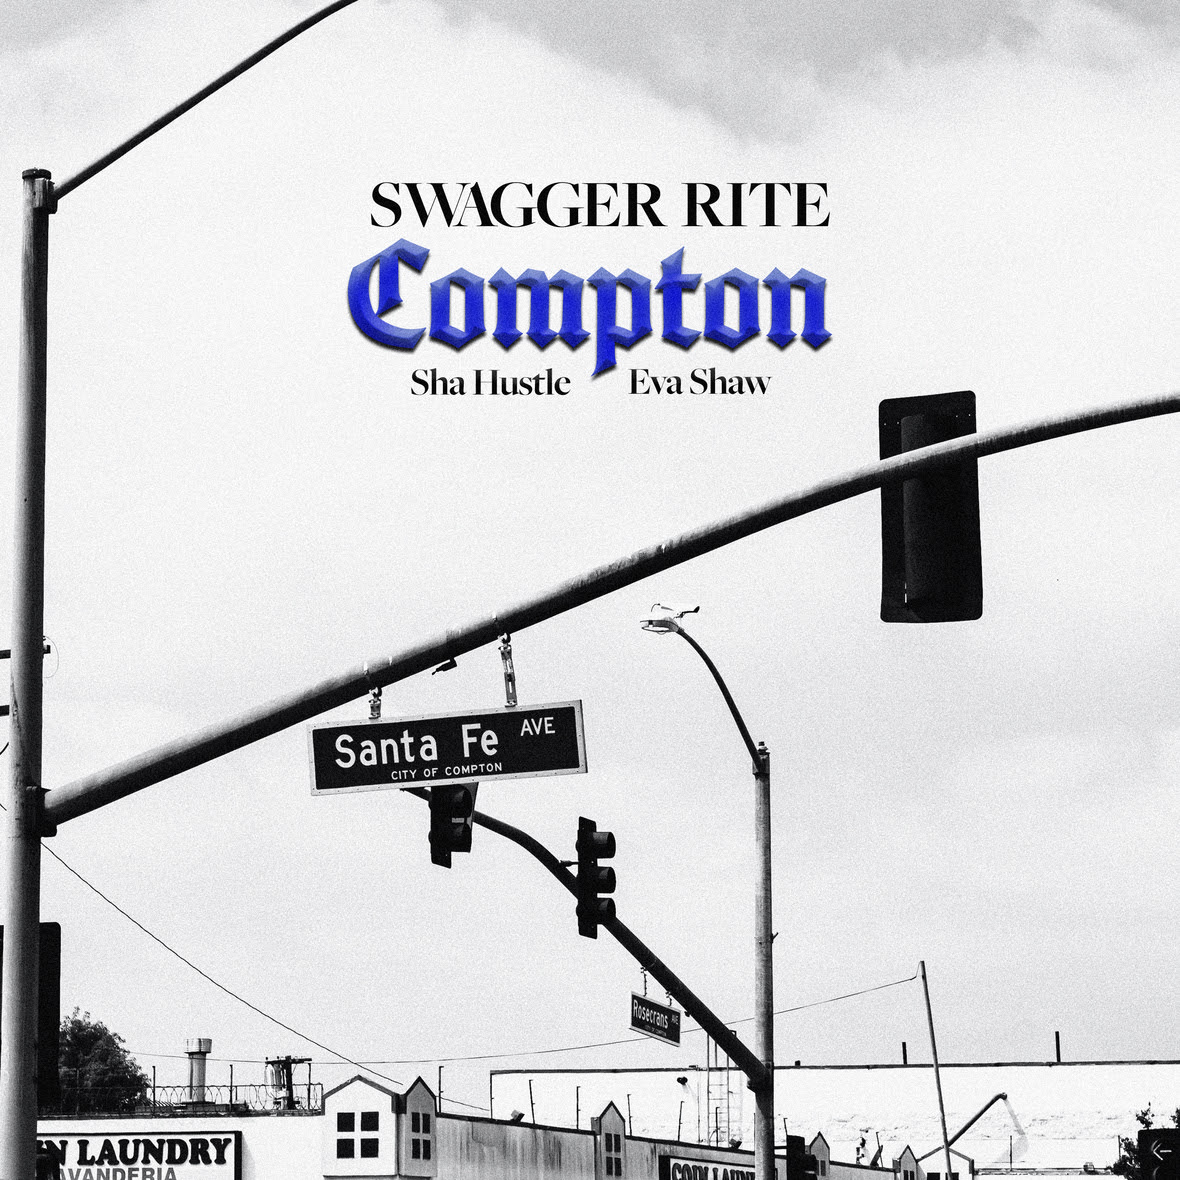 Toronto Rapper Swagger Rite Is Inspired By L.A. Hip-Hop On 'Compton' 